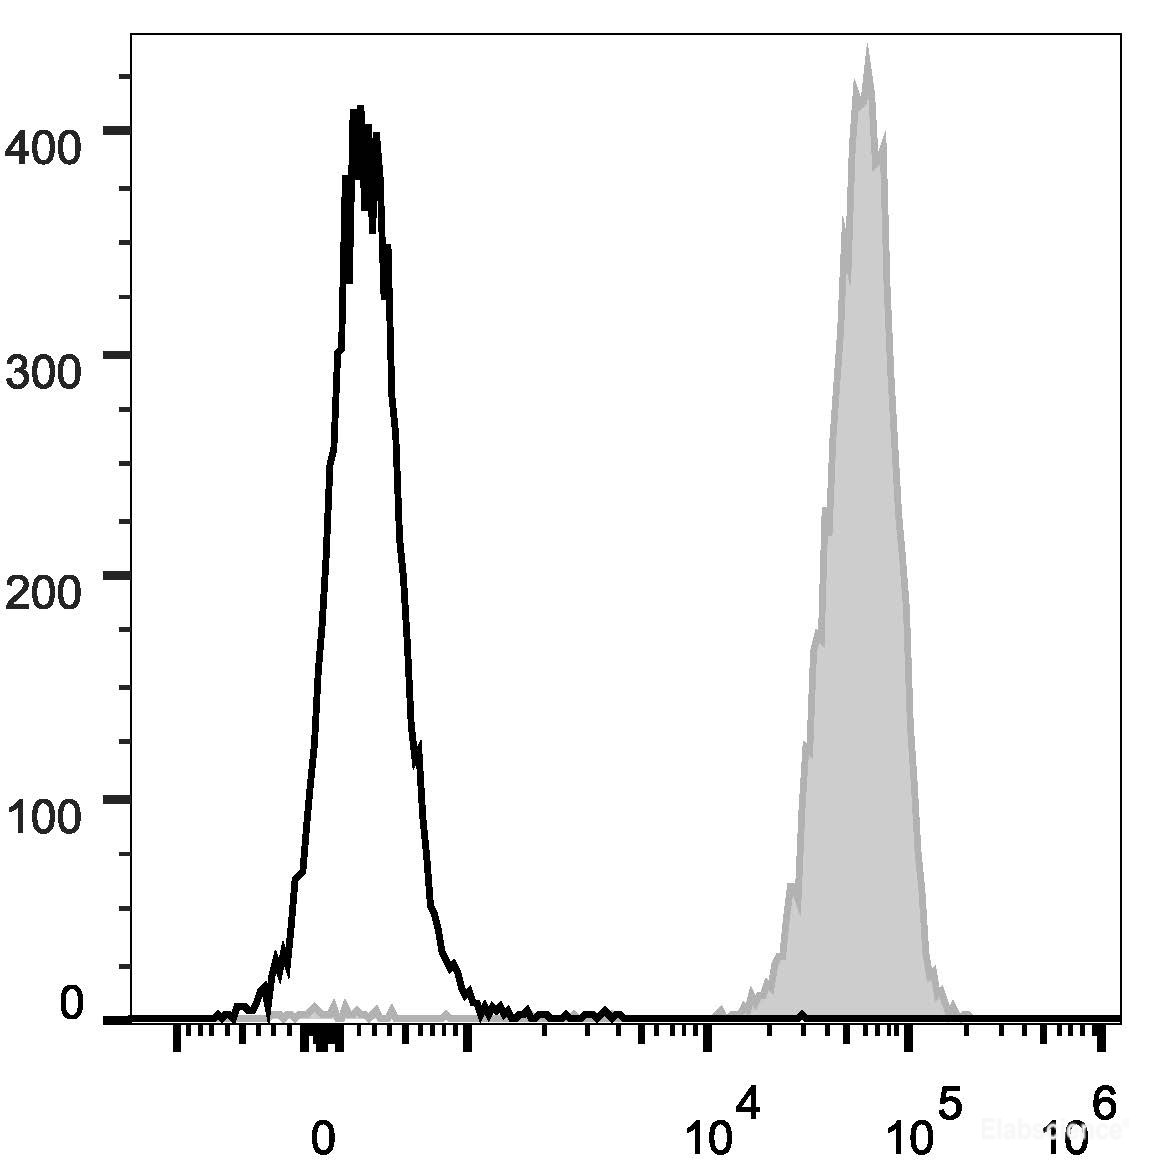 C57BL/6 murine splenocytes are stained with PE Anti-Mouse CD45 Antibody (filled gray histogram). Unstained splenocytes (empty black histogram) are used as control.